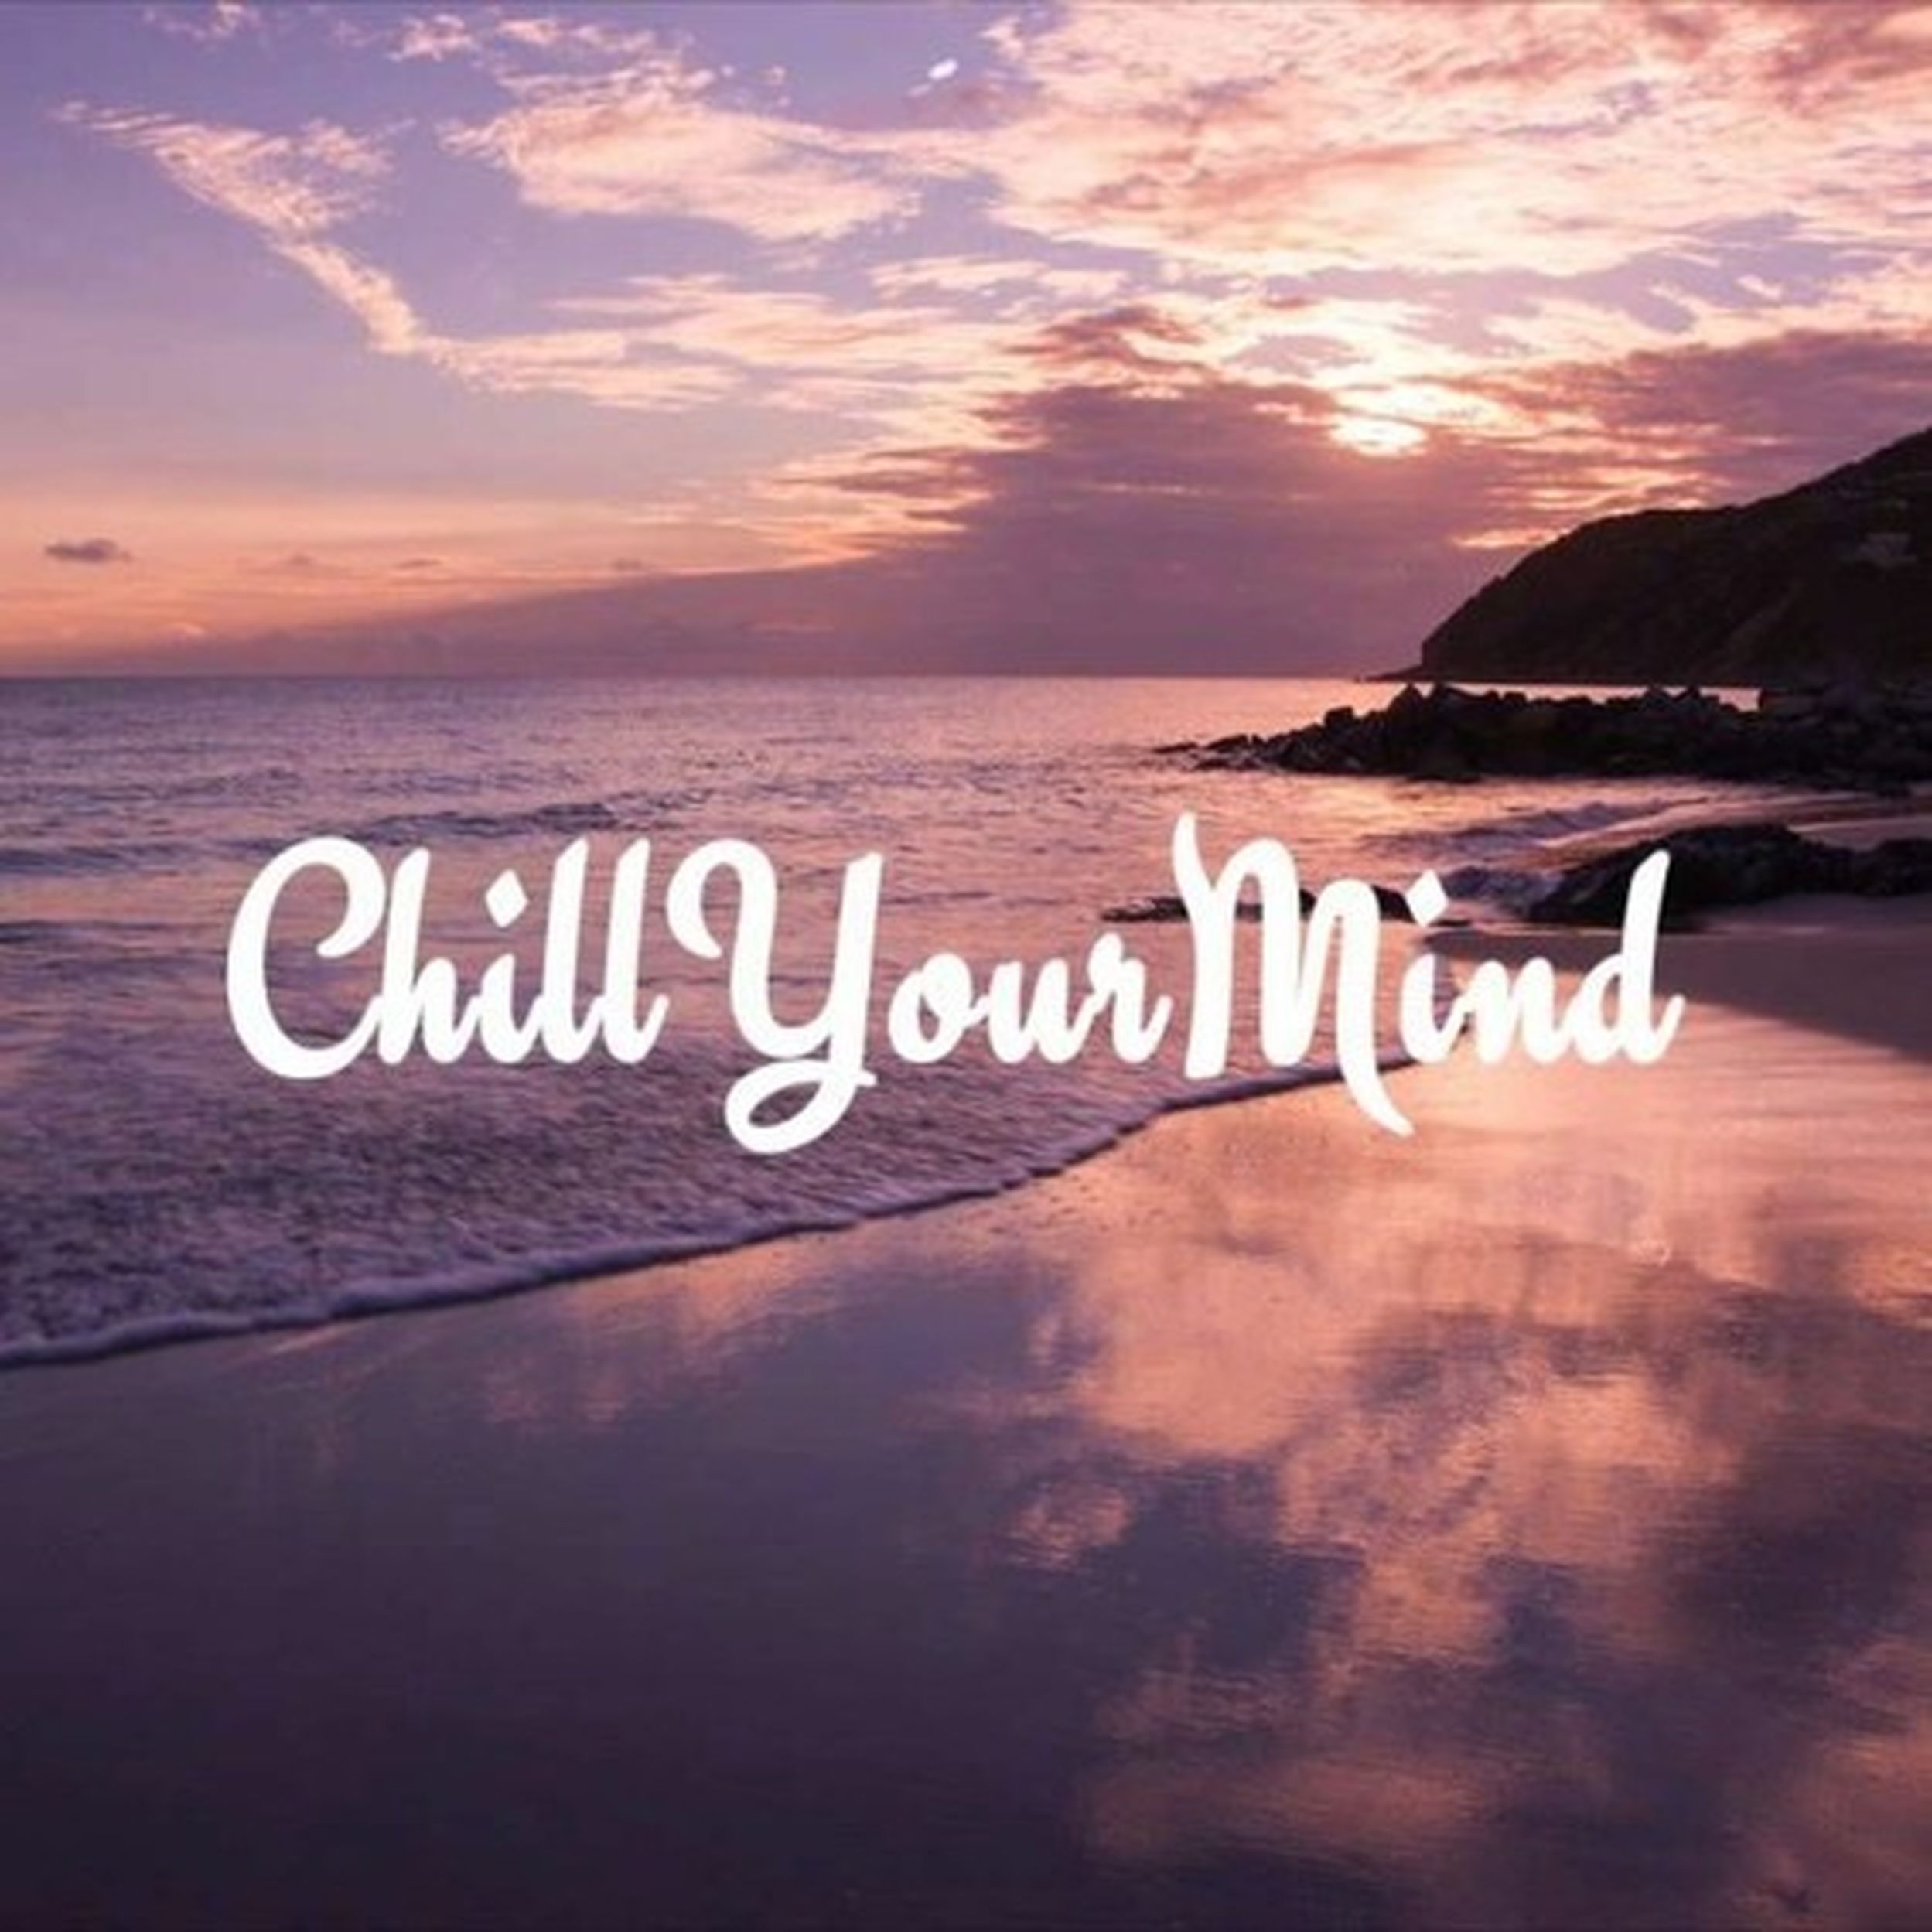 9 chill. Chill your Mind. Soul Chill.